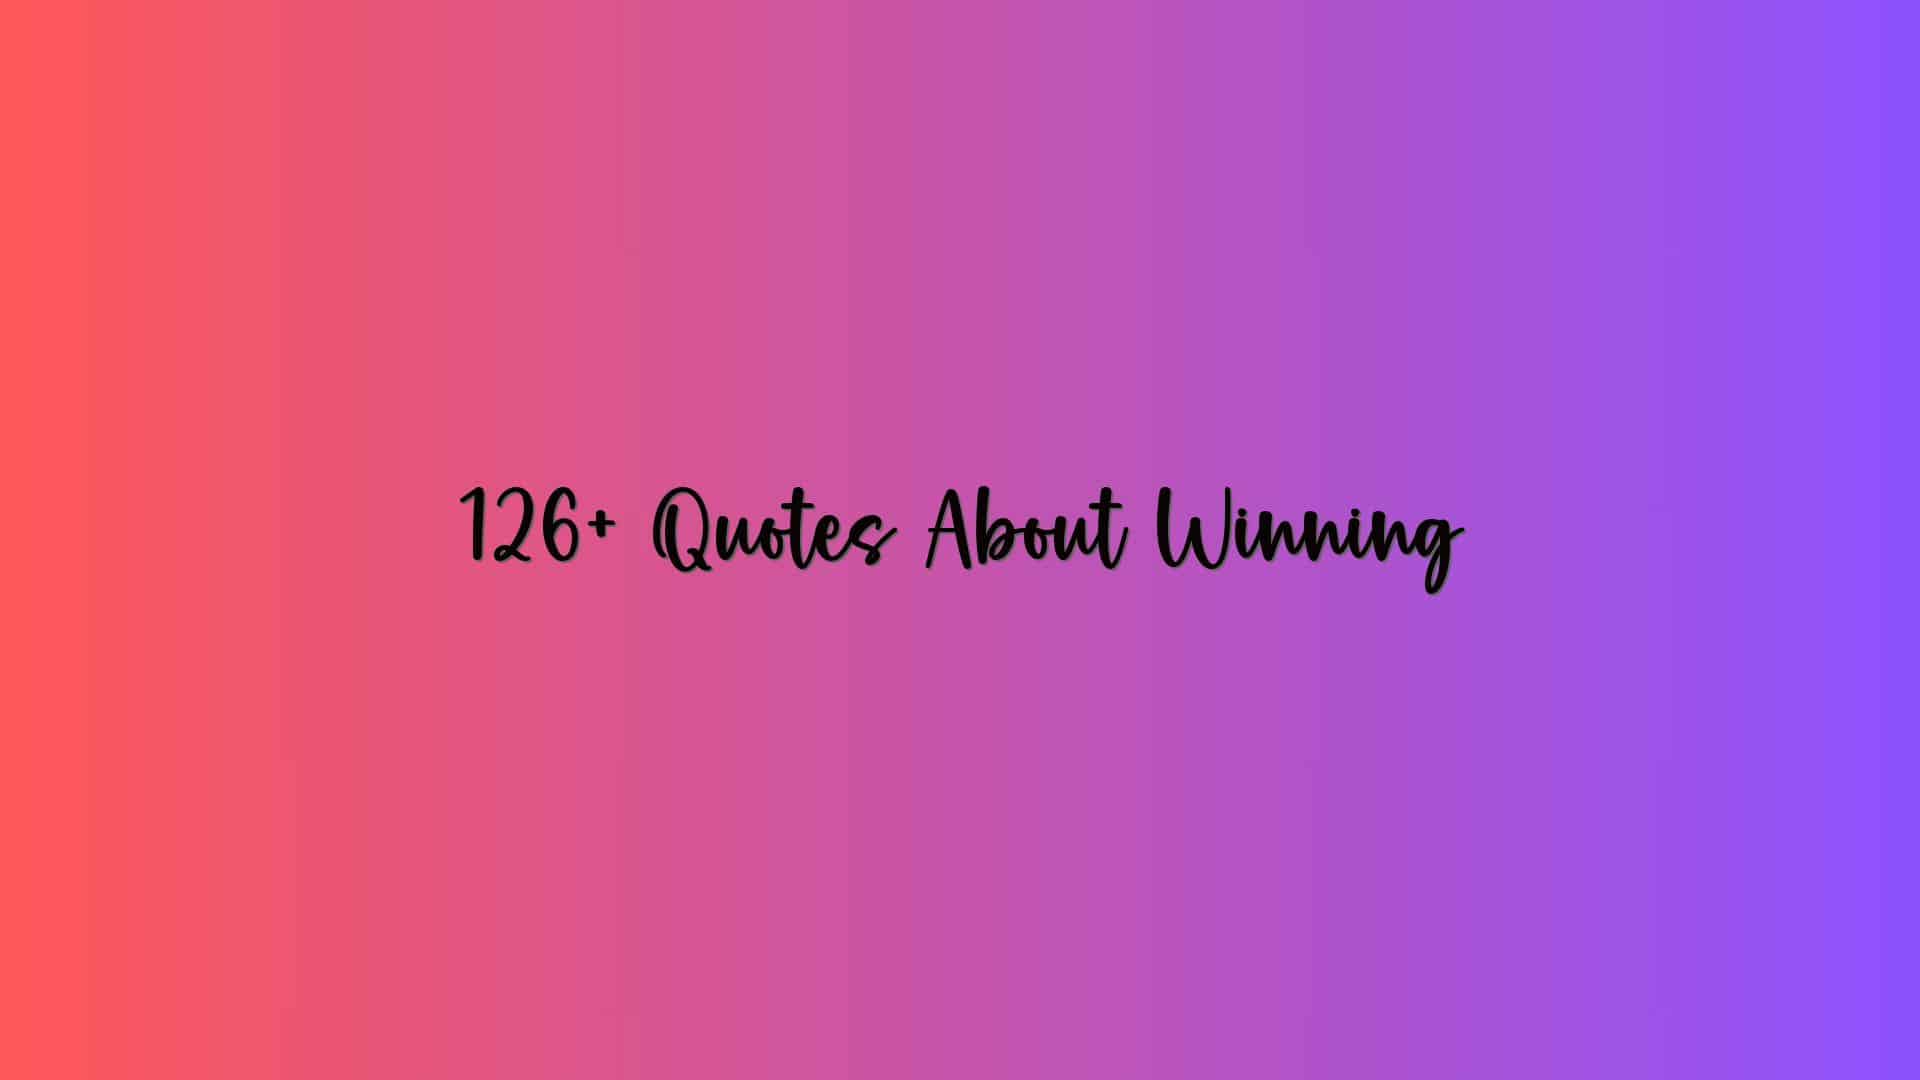 126+ Quotes About Winning